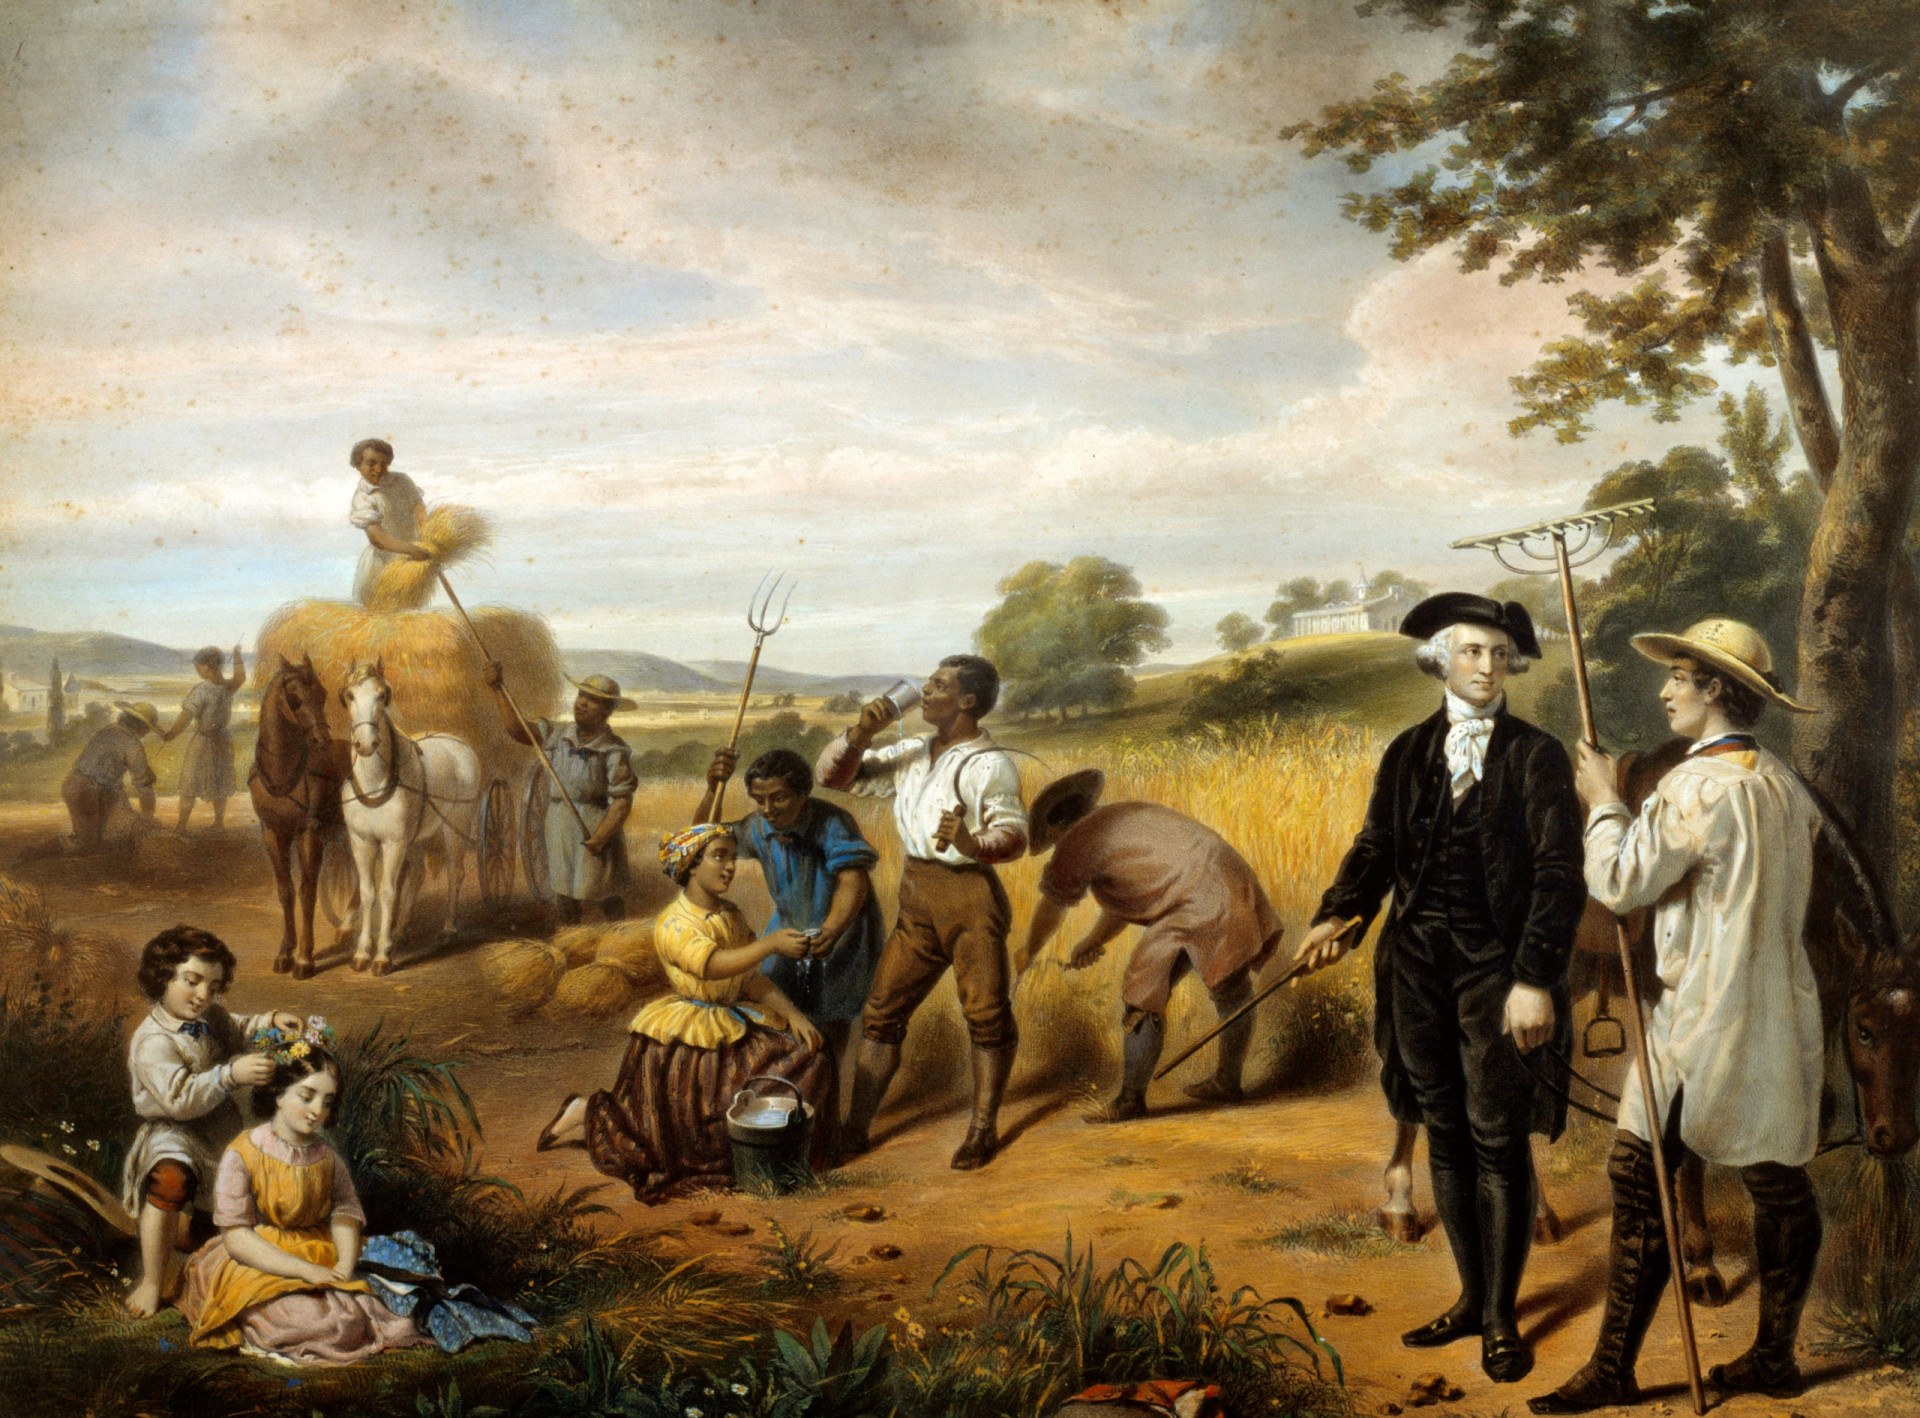 A dark history of American presidents who owned slaves